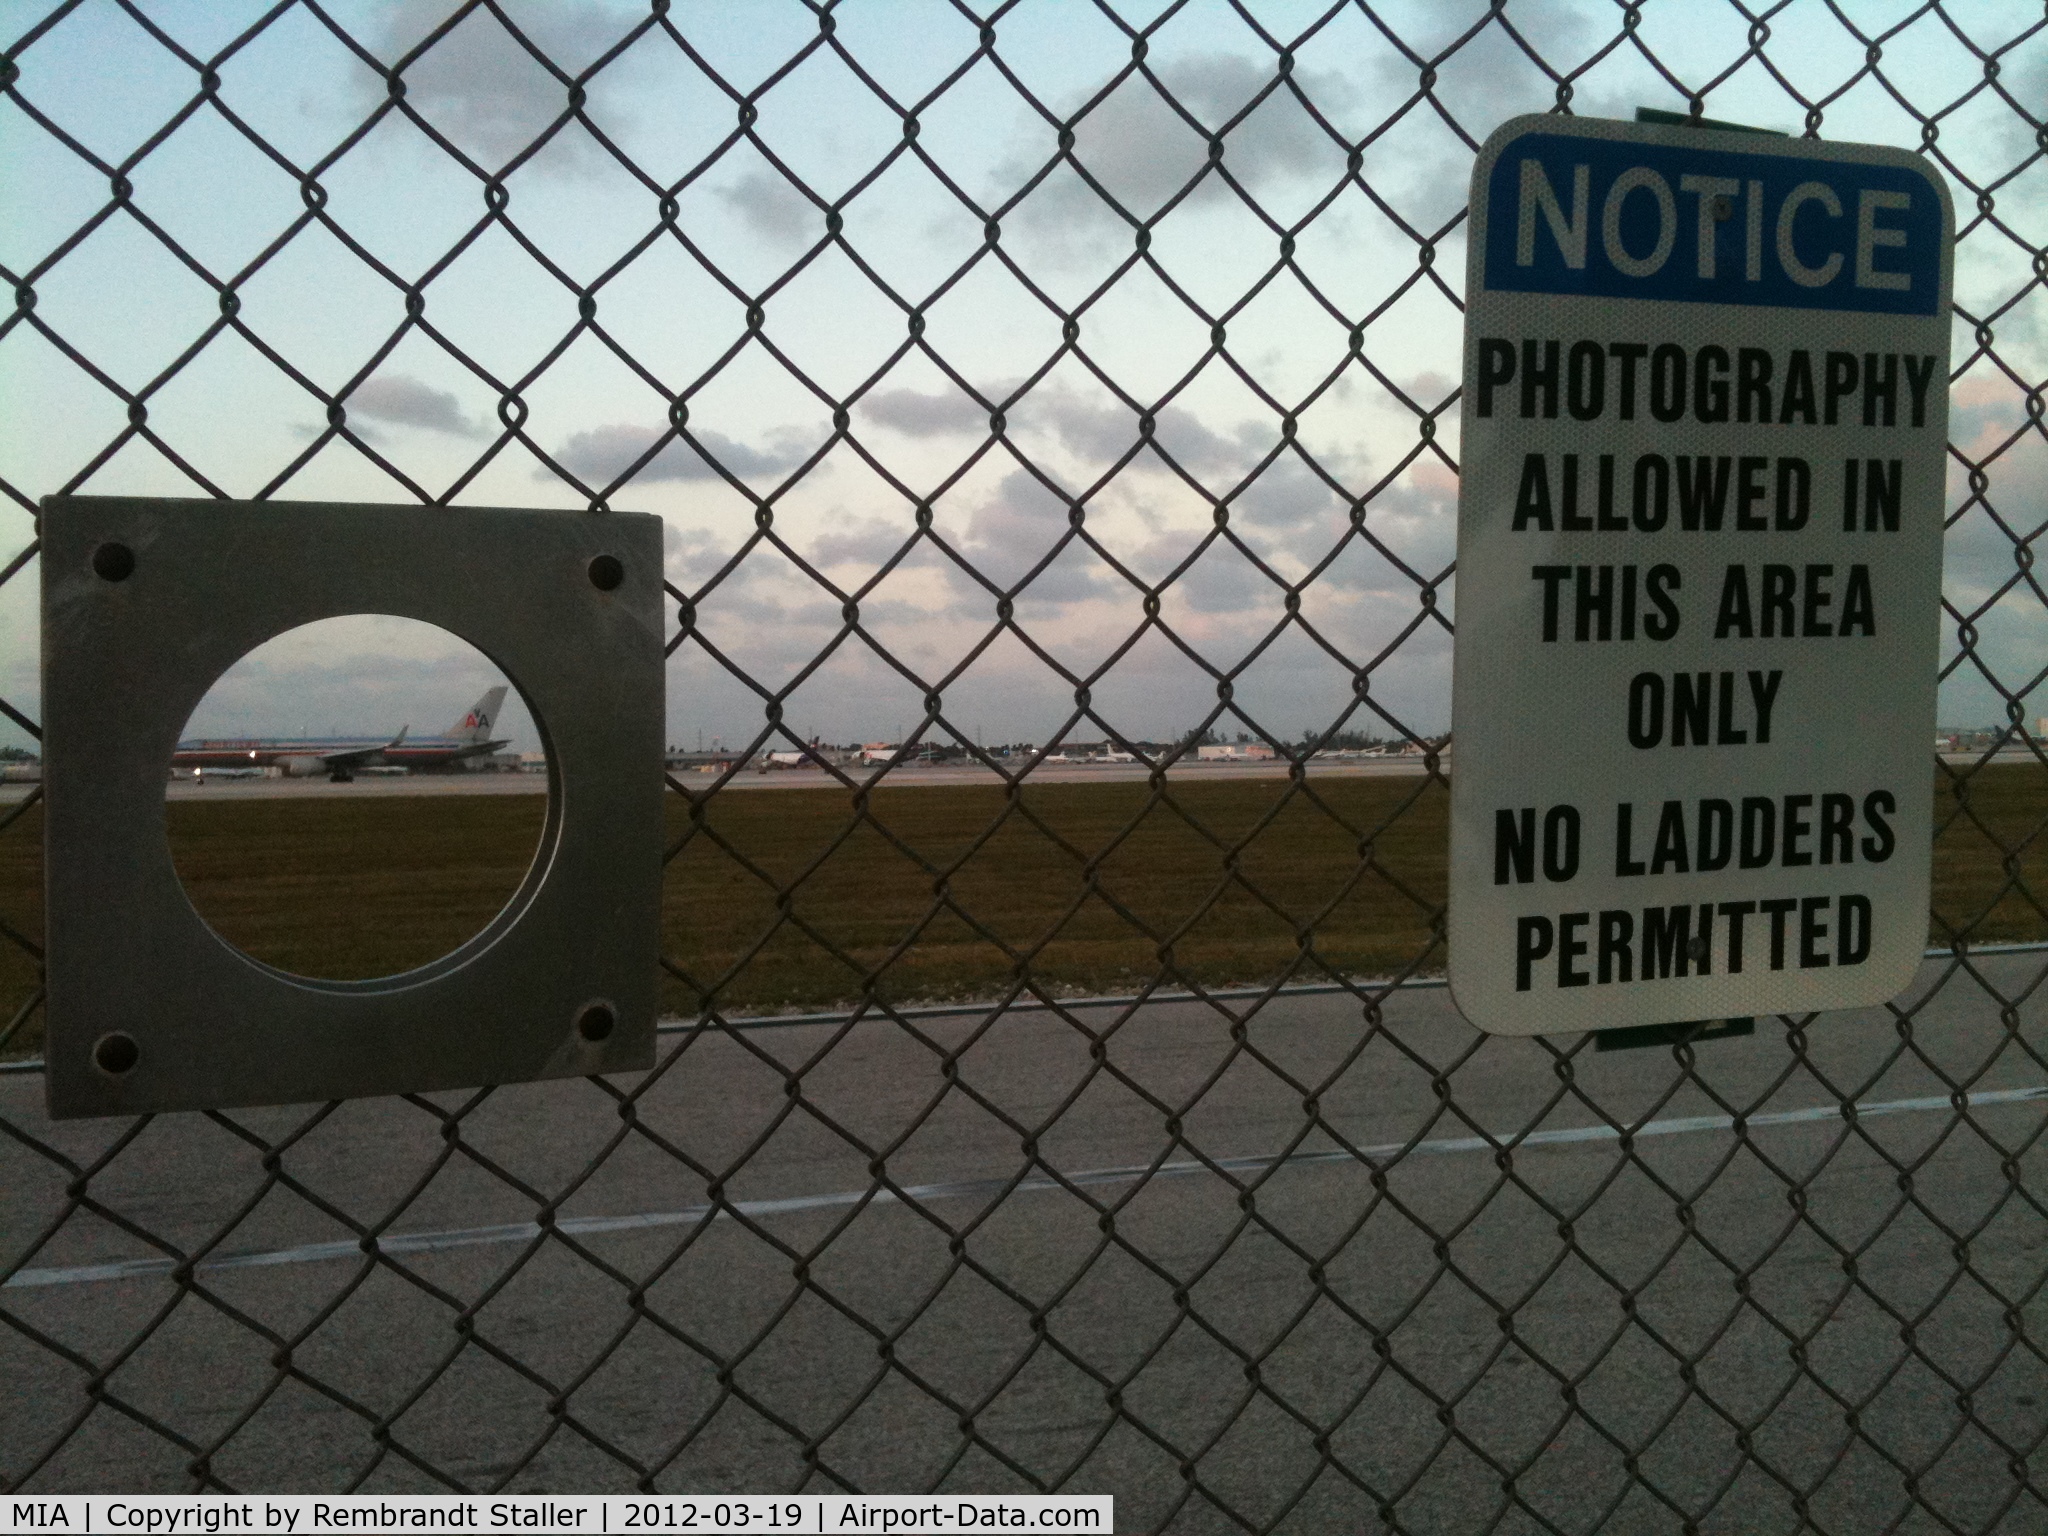 Miami International Airport (MIA) - Those nice holes in the fence for our long lenses!